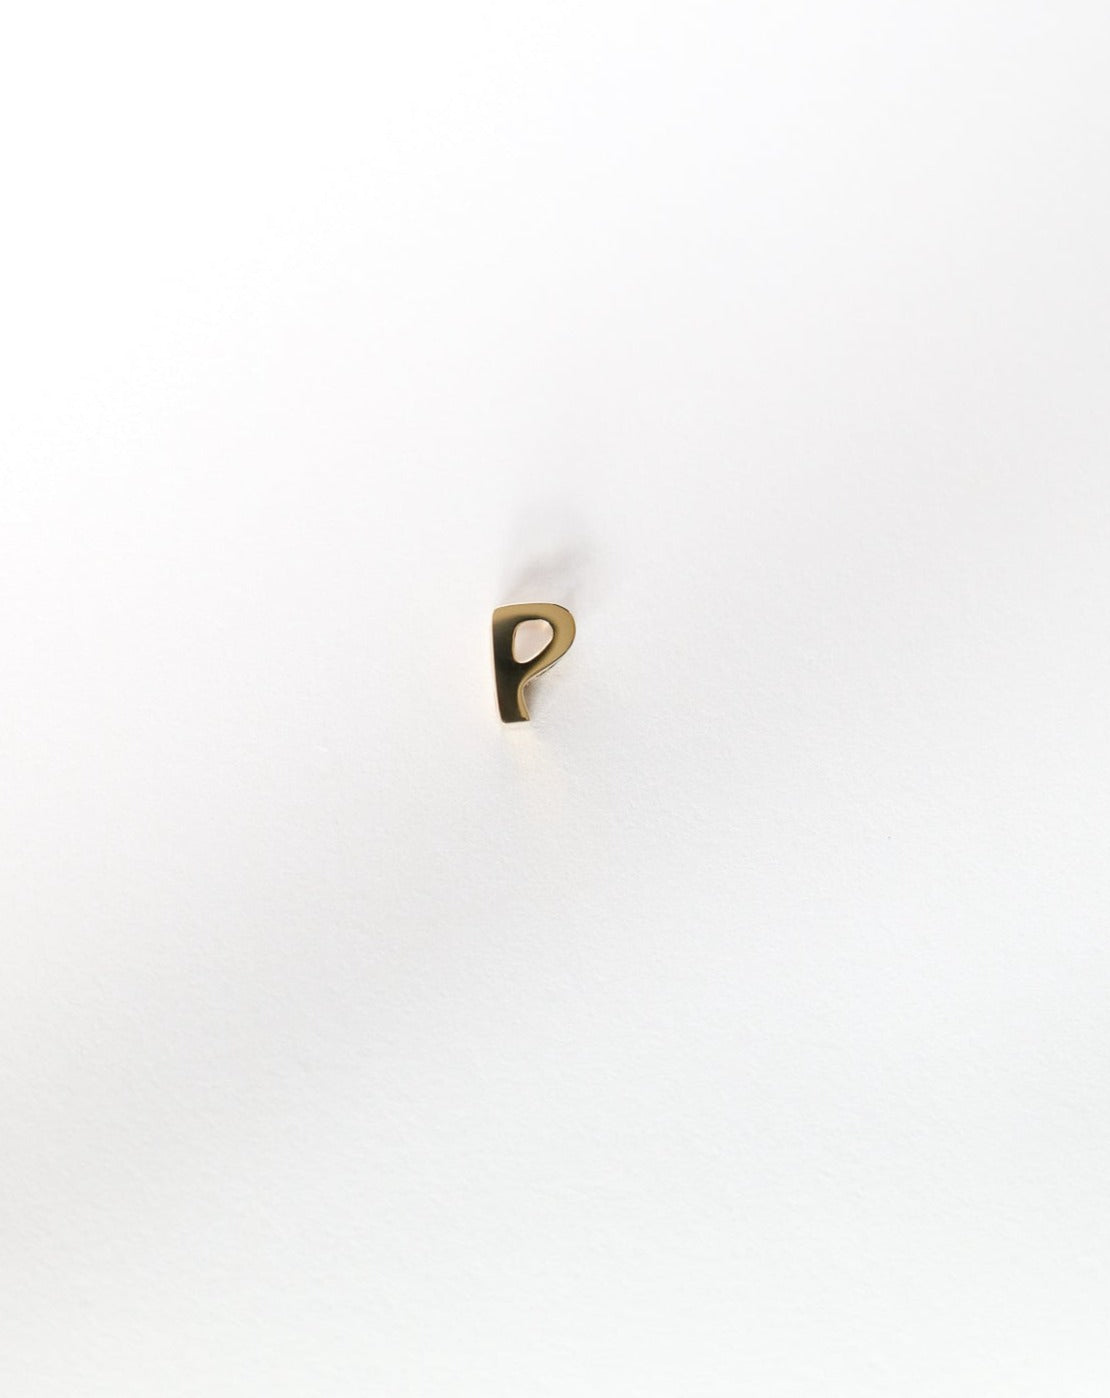 P initial charm letter pendant in 14kt gold